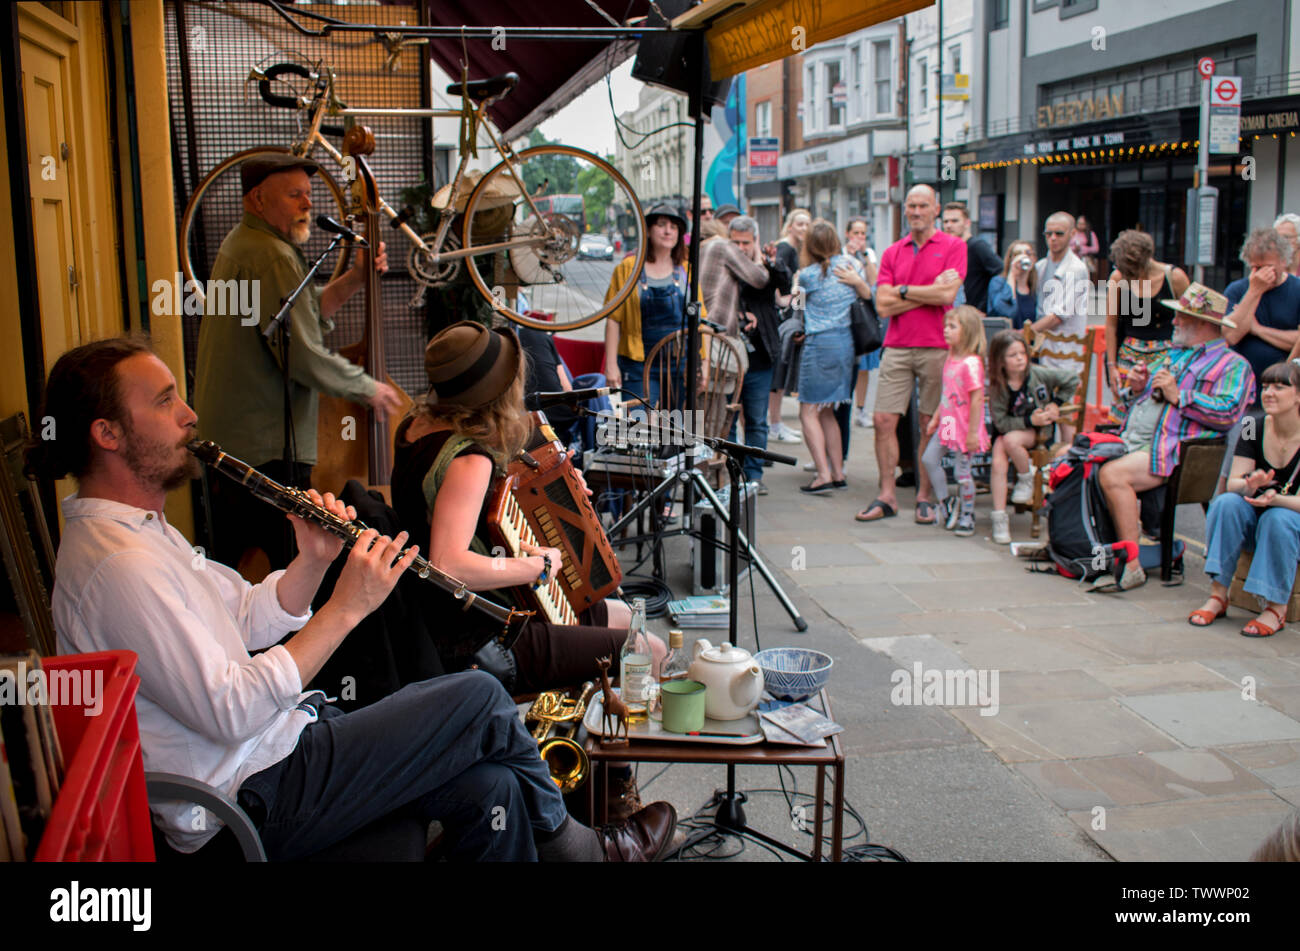 Crystal Palace south London annual street community free festival, musicians playing outside a second hand shop opposite the Everyman Cinema 2019 local people audience 2010s  UK HOMER SYKES Stock Photo